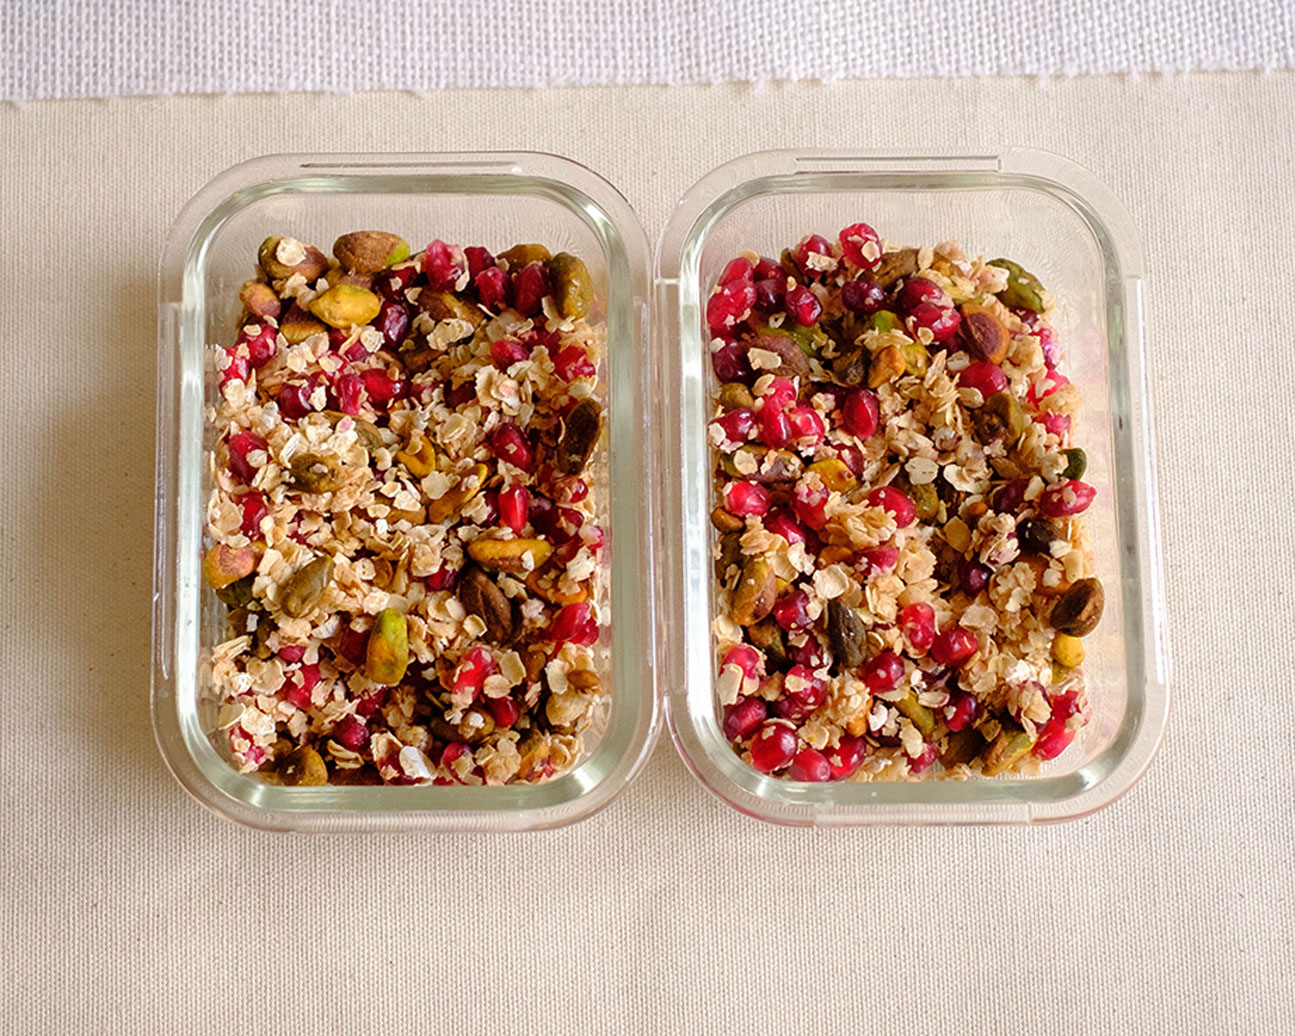 Best Meal Prepping Containers - PrepYoSelf